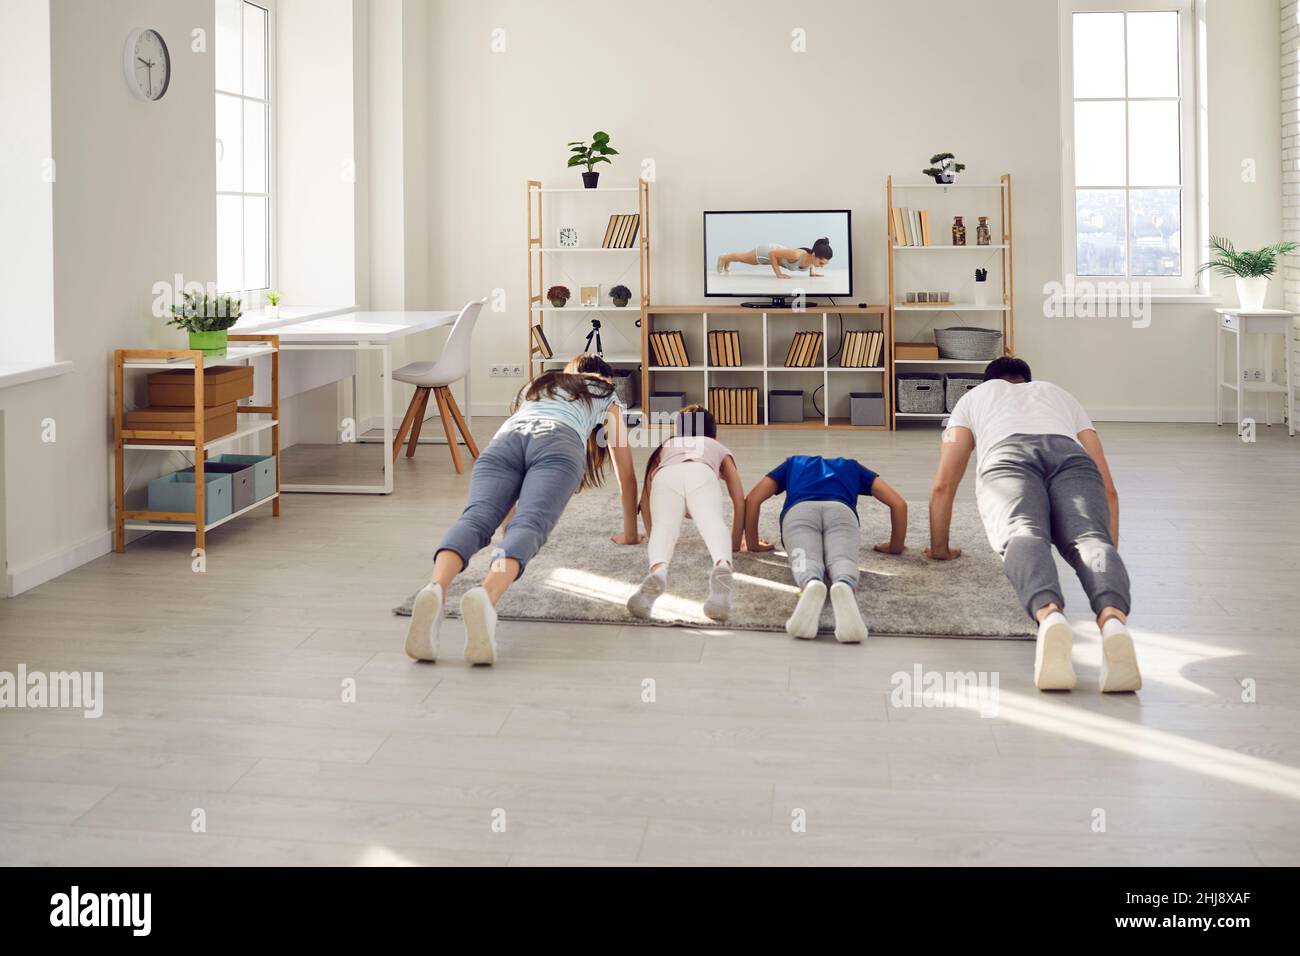 Family watching a fitness workout lesson on TV and doing push ups exercise together Stock Photo